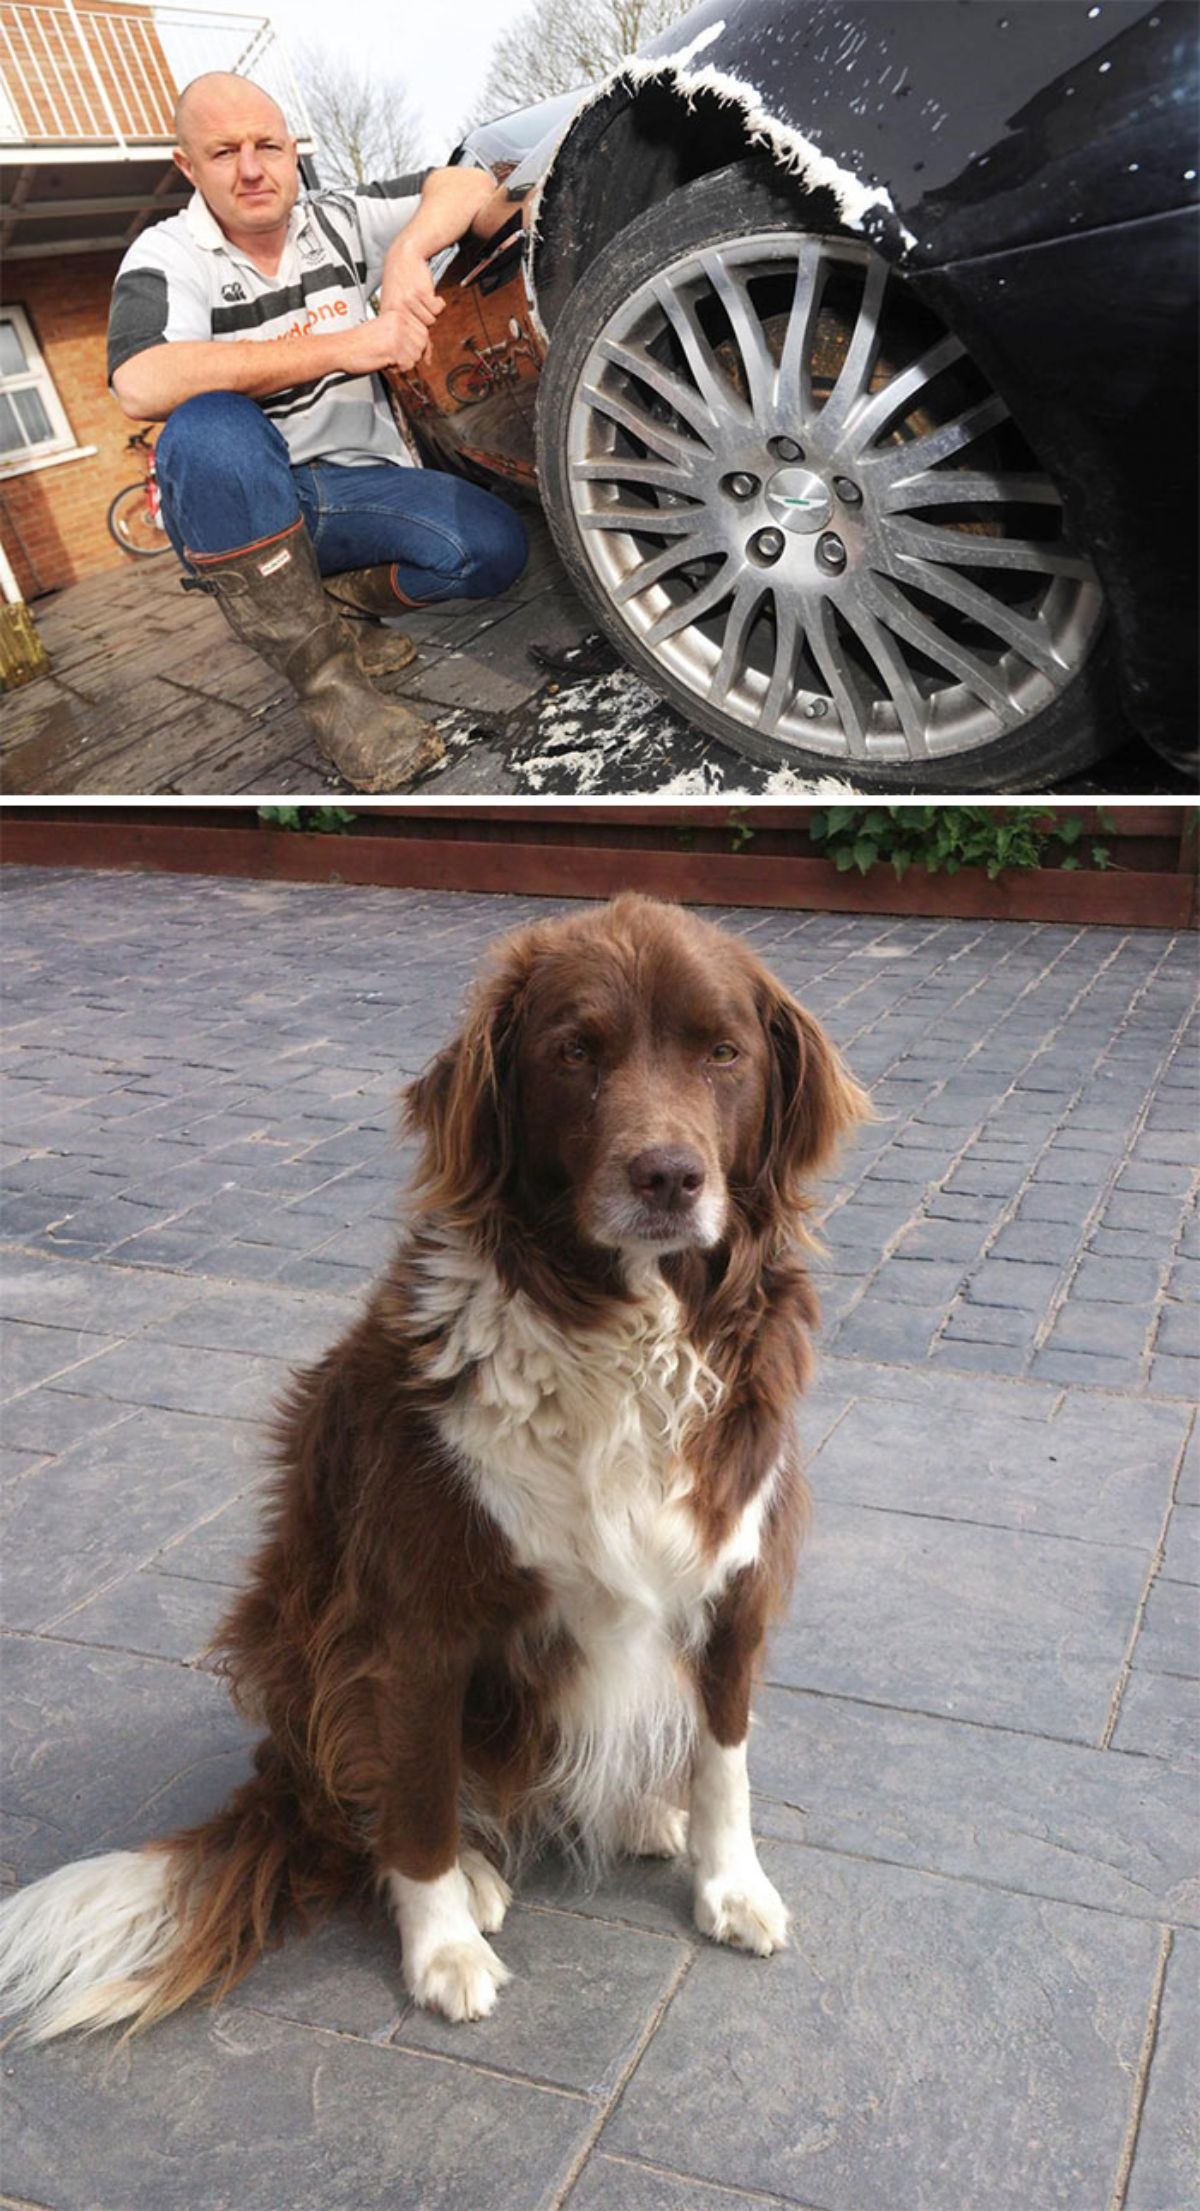 1 photo of black car with a part over the tire chewed up with a man kneeling by it and 1 photo of fluffy brown and white dog sitting on the ground